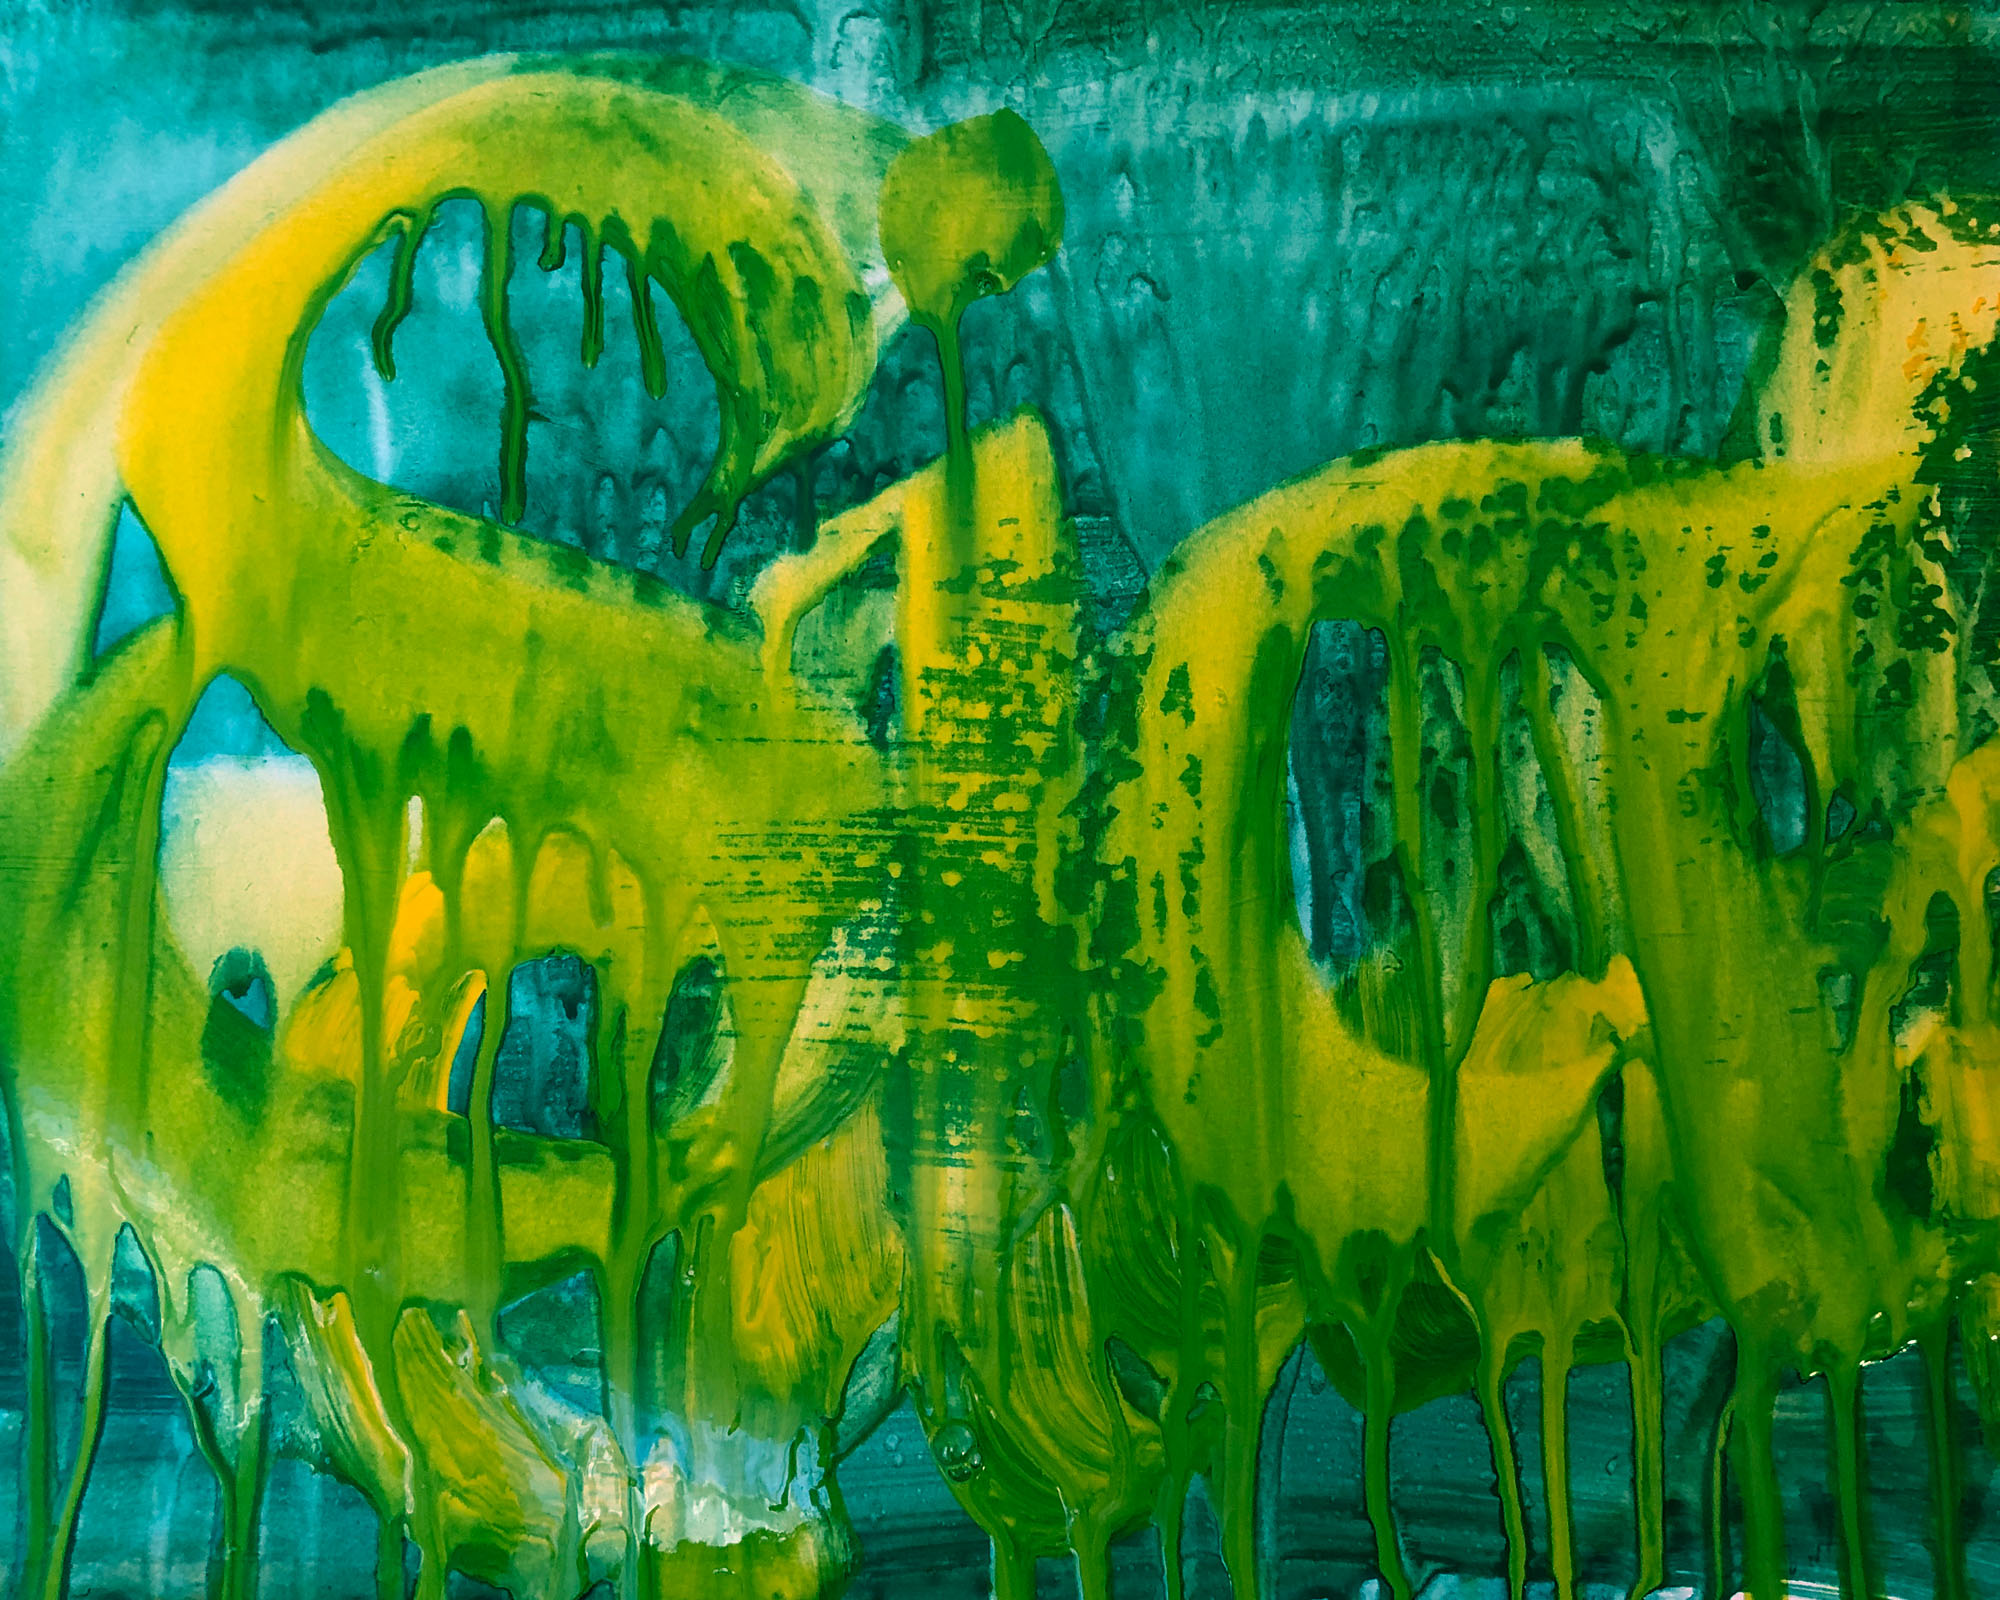 Sia written in yellow on a muddy green partially dry under layer